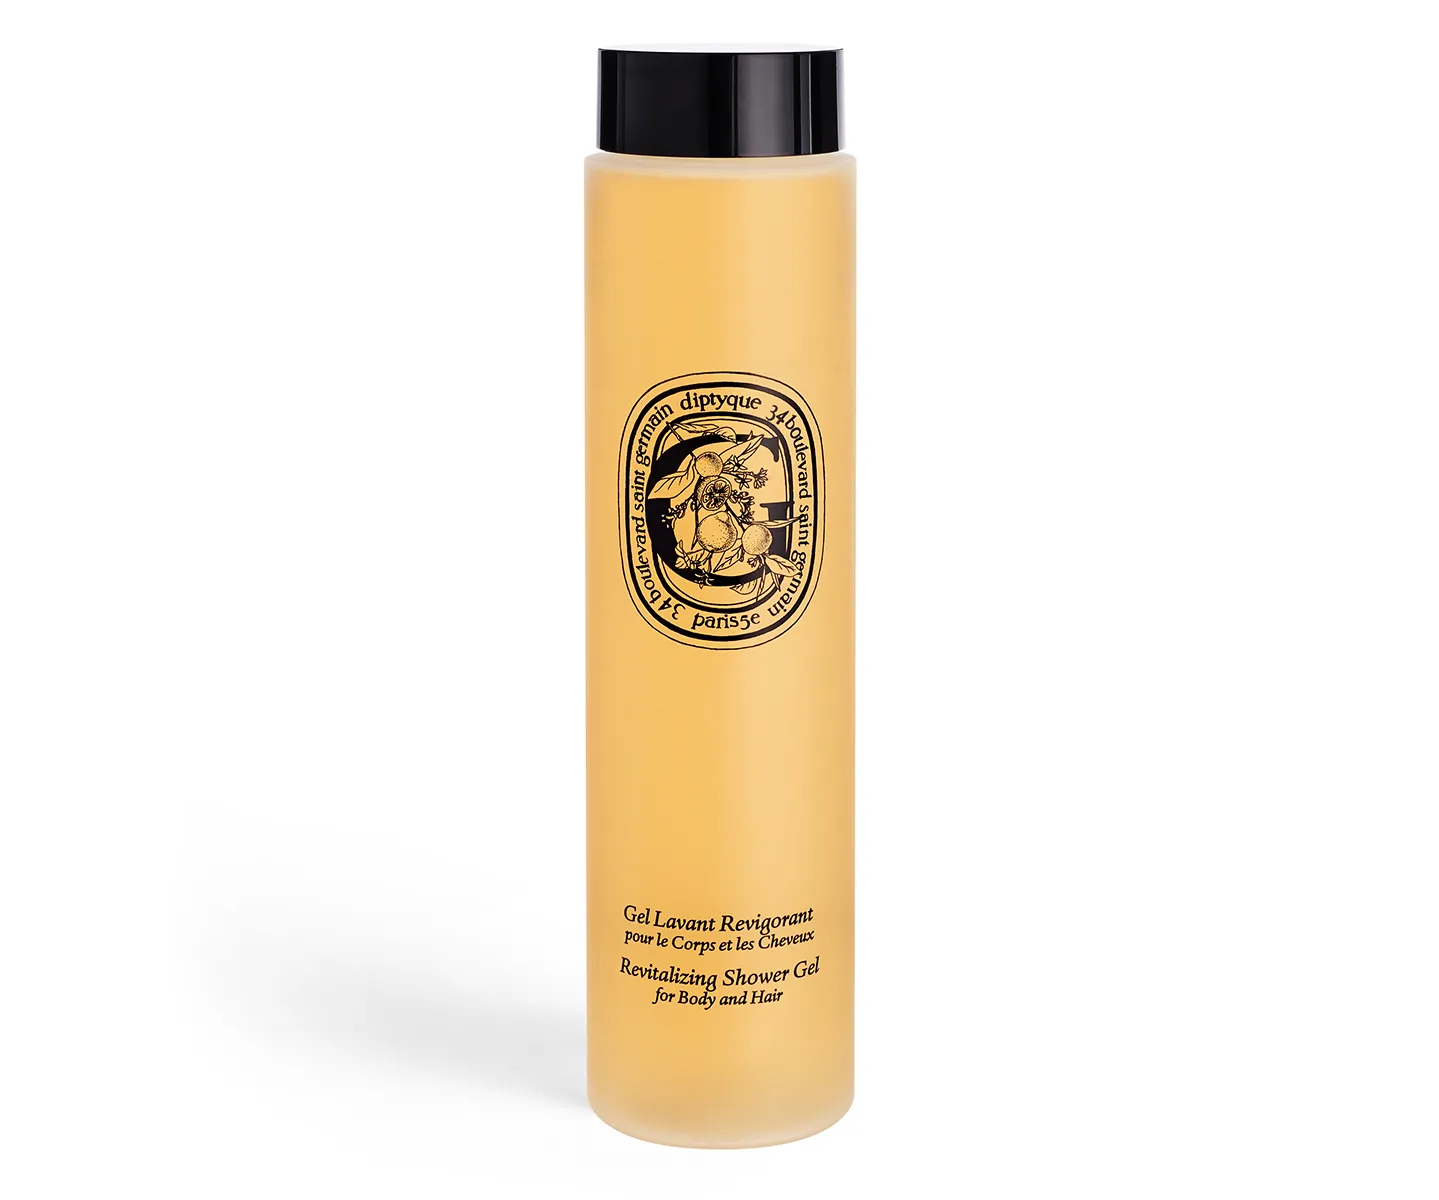 The Art of Body Care Revitalizing Shower Gel by Diptyque, one of the best French shower gels.